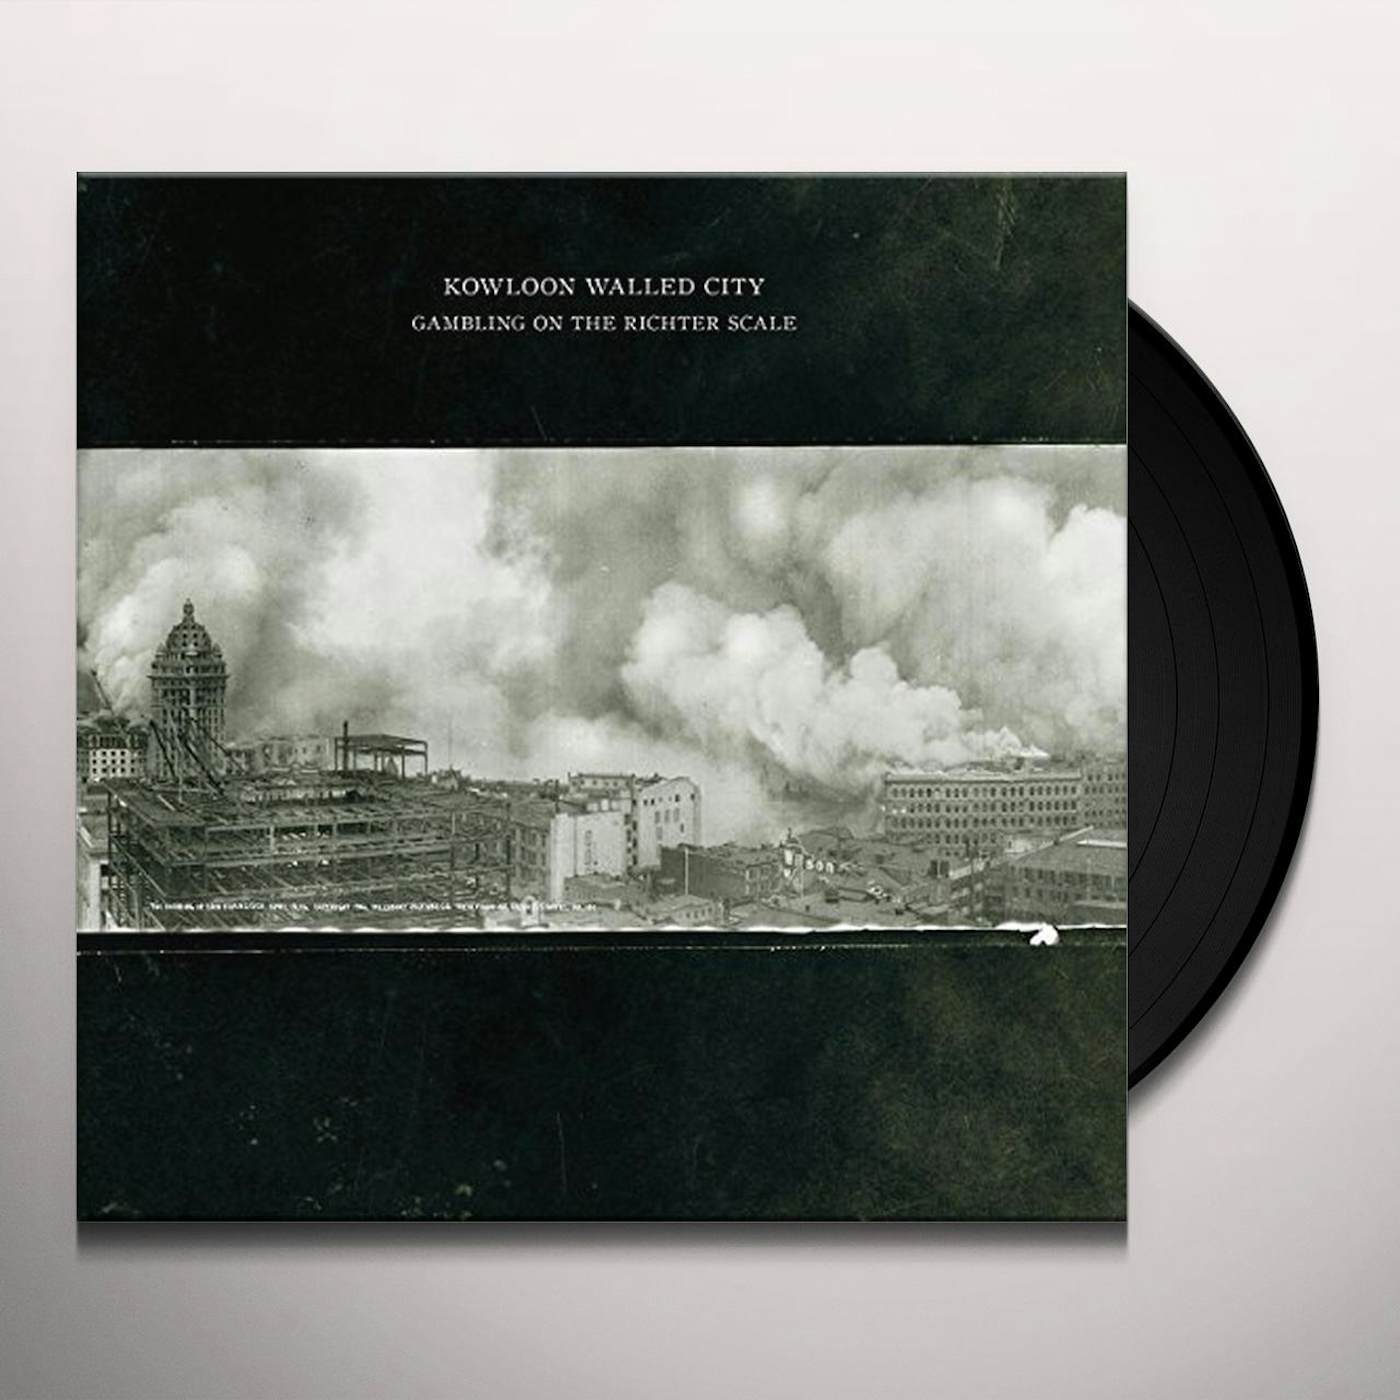 Kowloon Walled City Gambling on the Richter Scale Vinyl Record